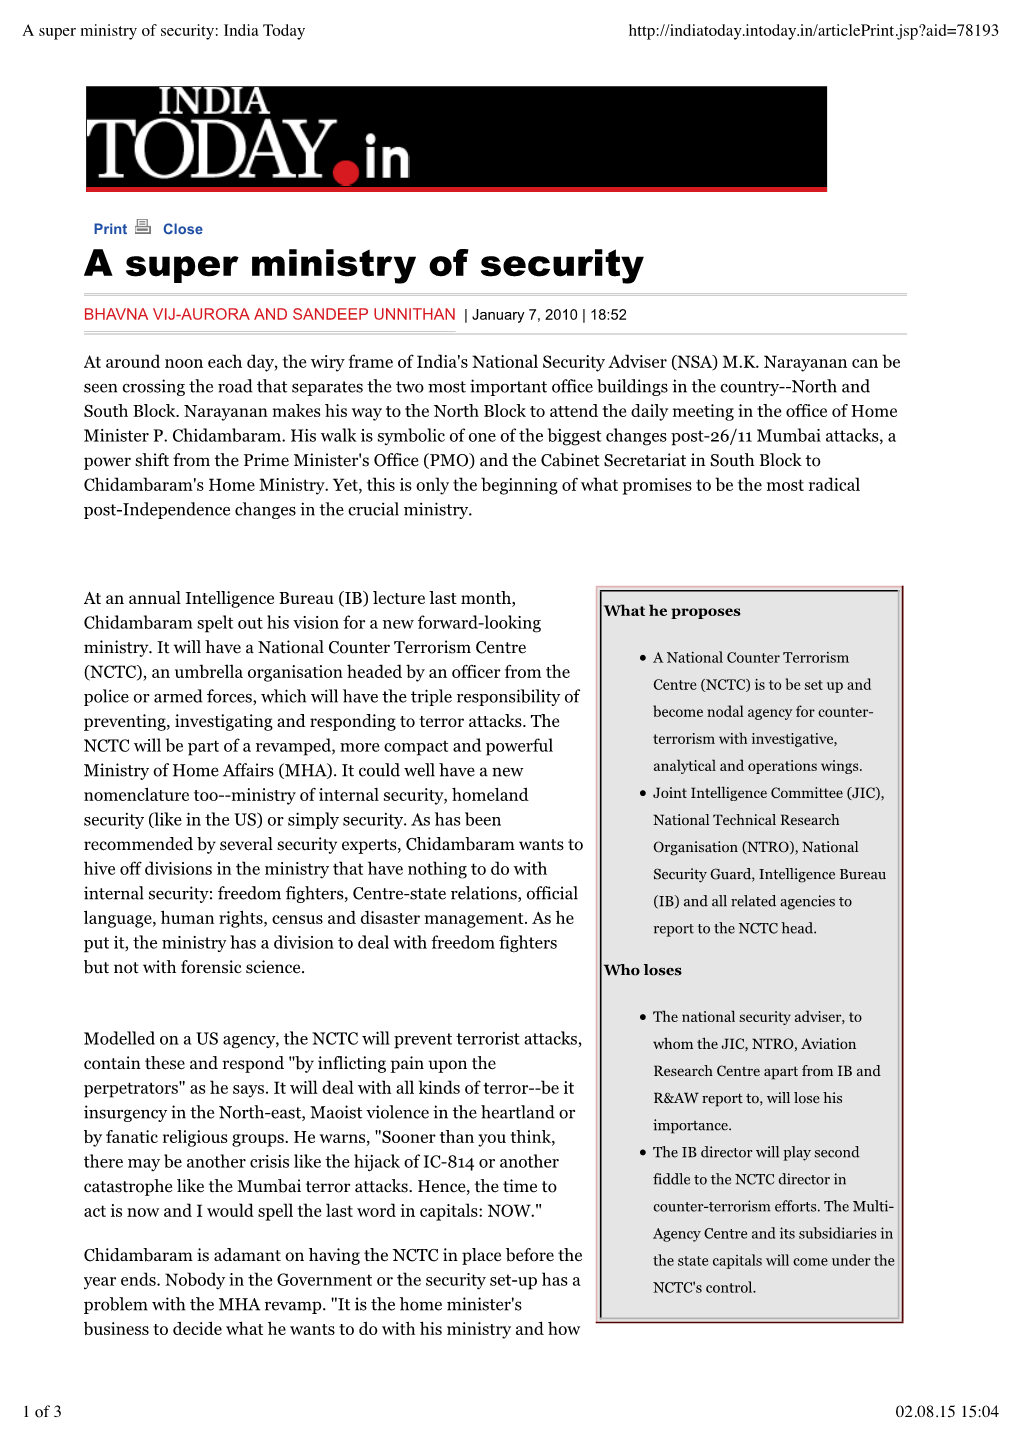 A Super Ministry of Security: India Today